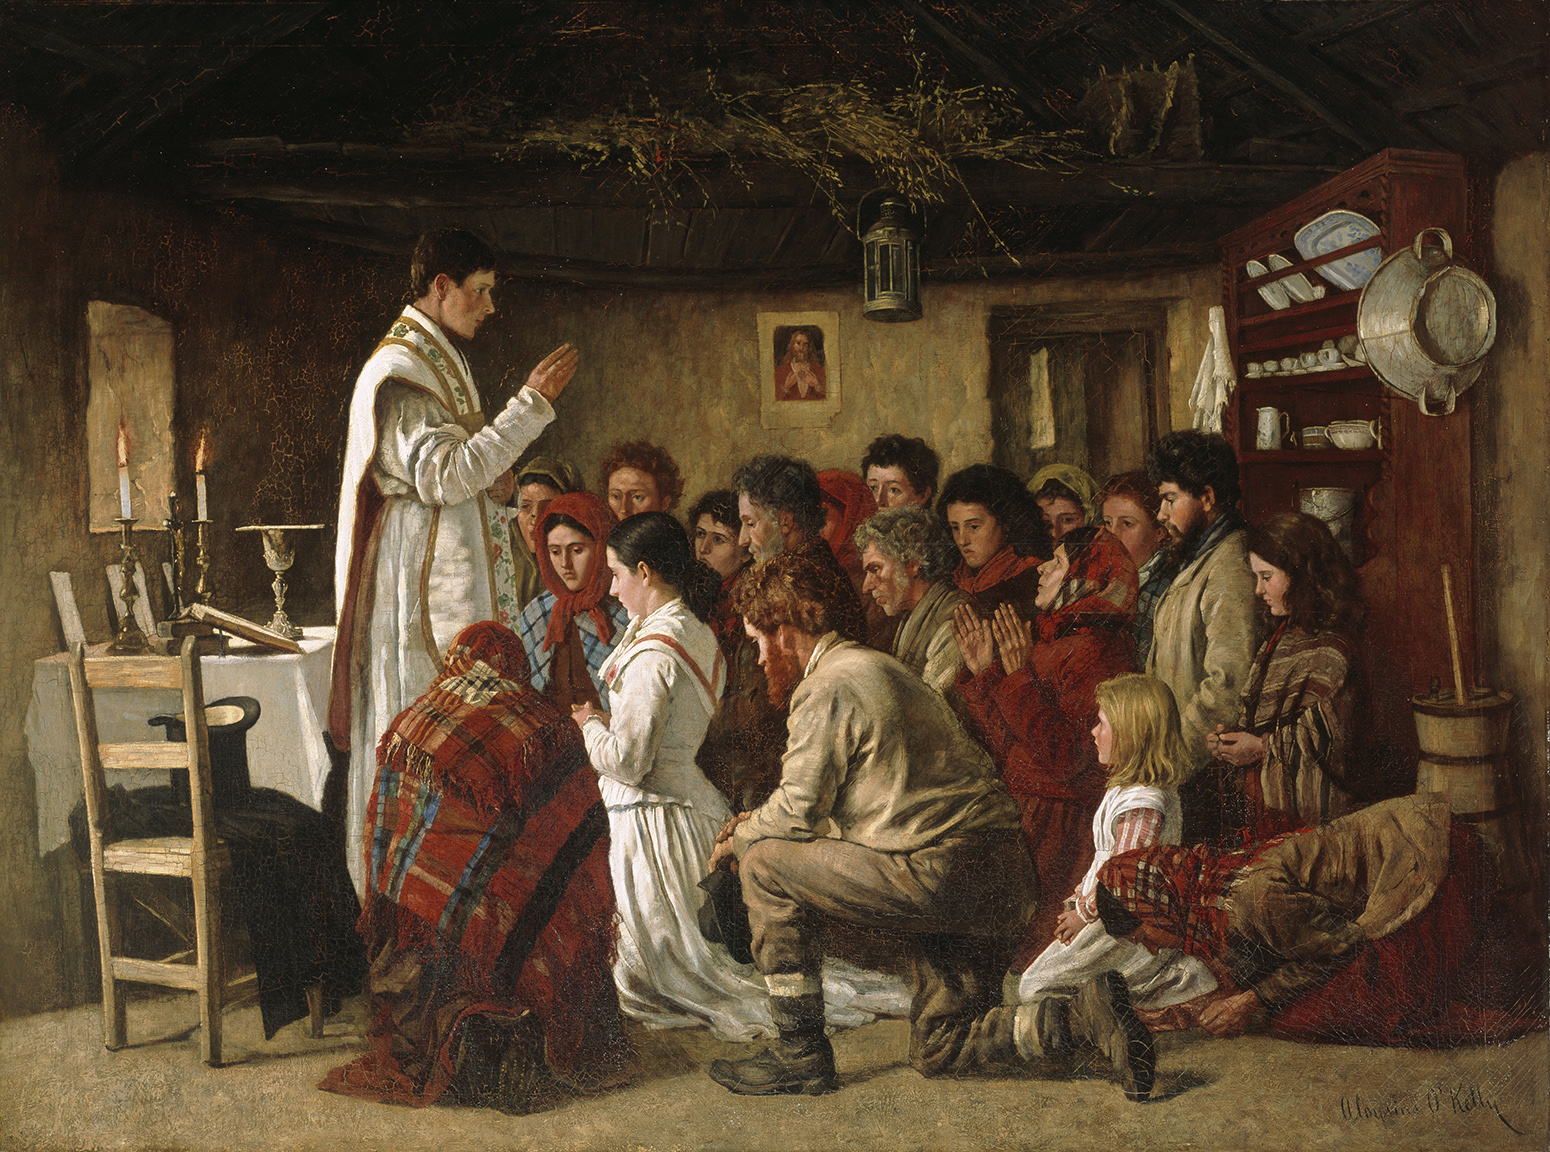 A priest stands in a cottage saying mass. Around him, people of all ages are kneeling.